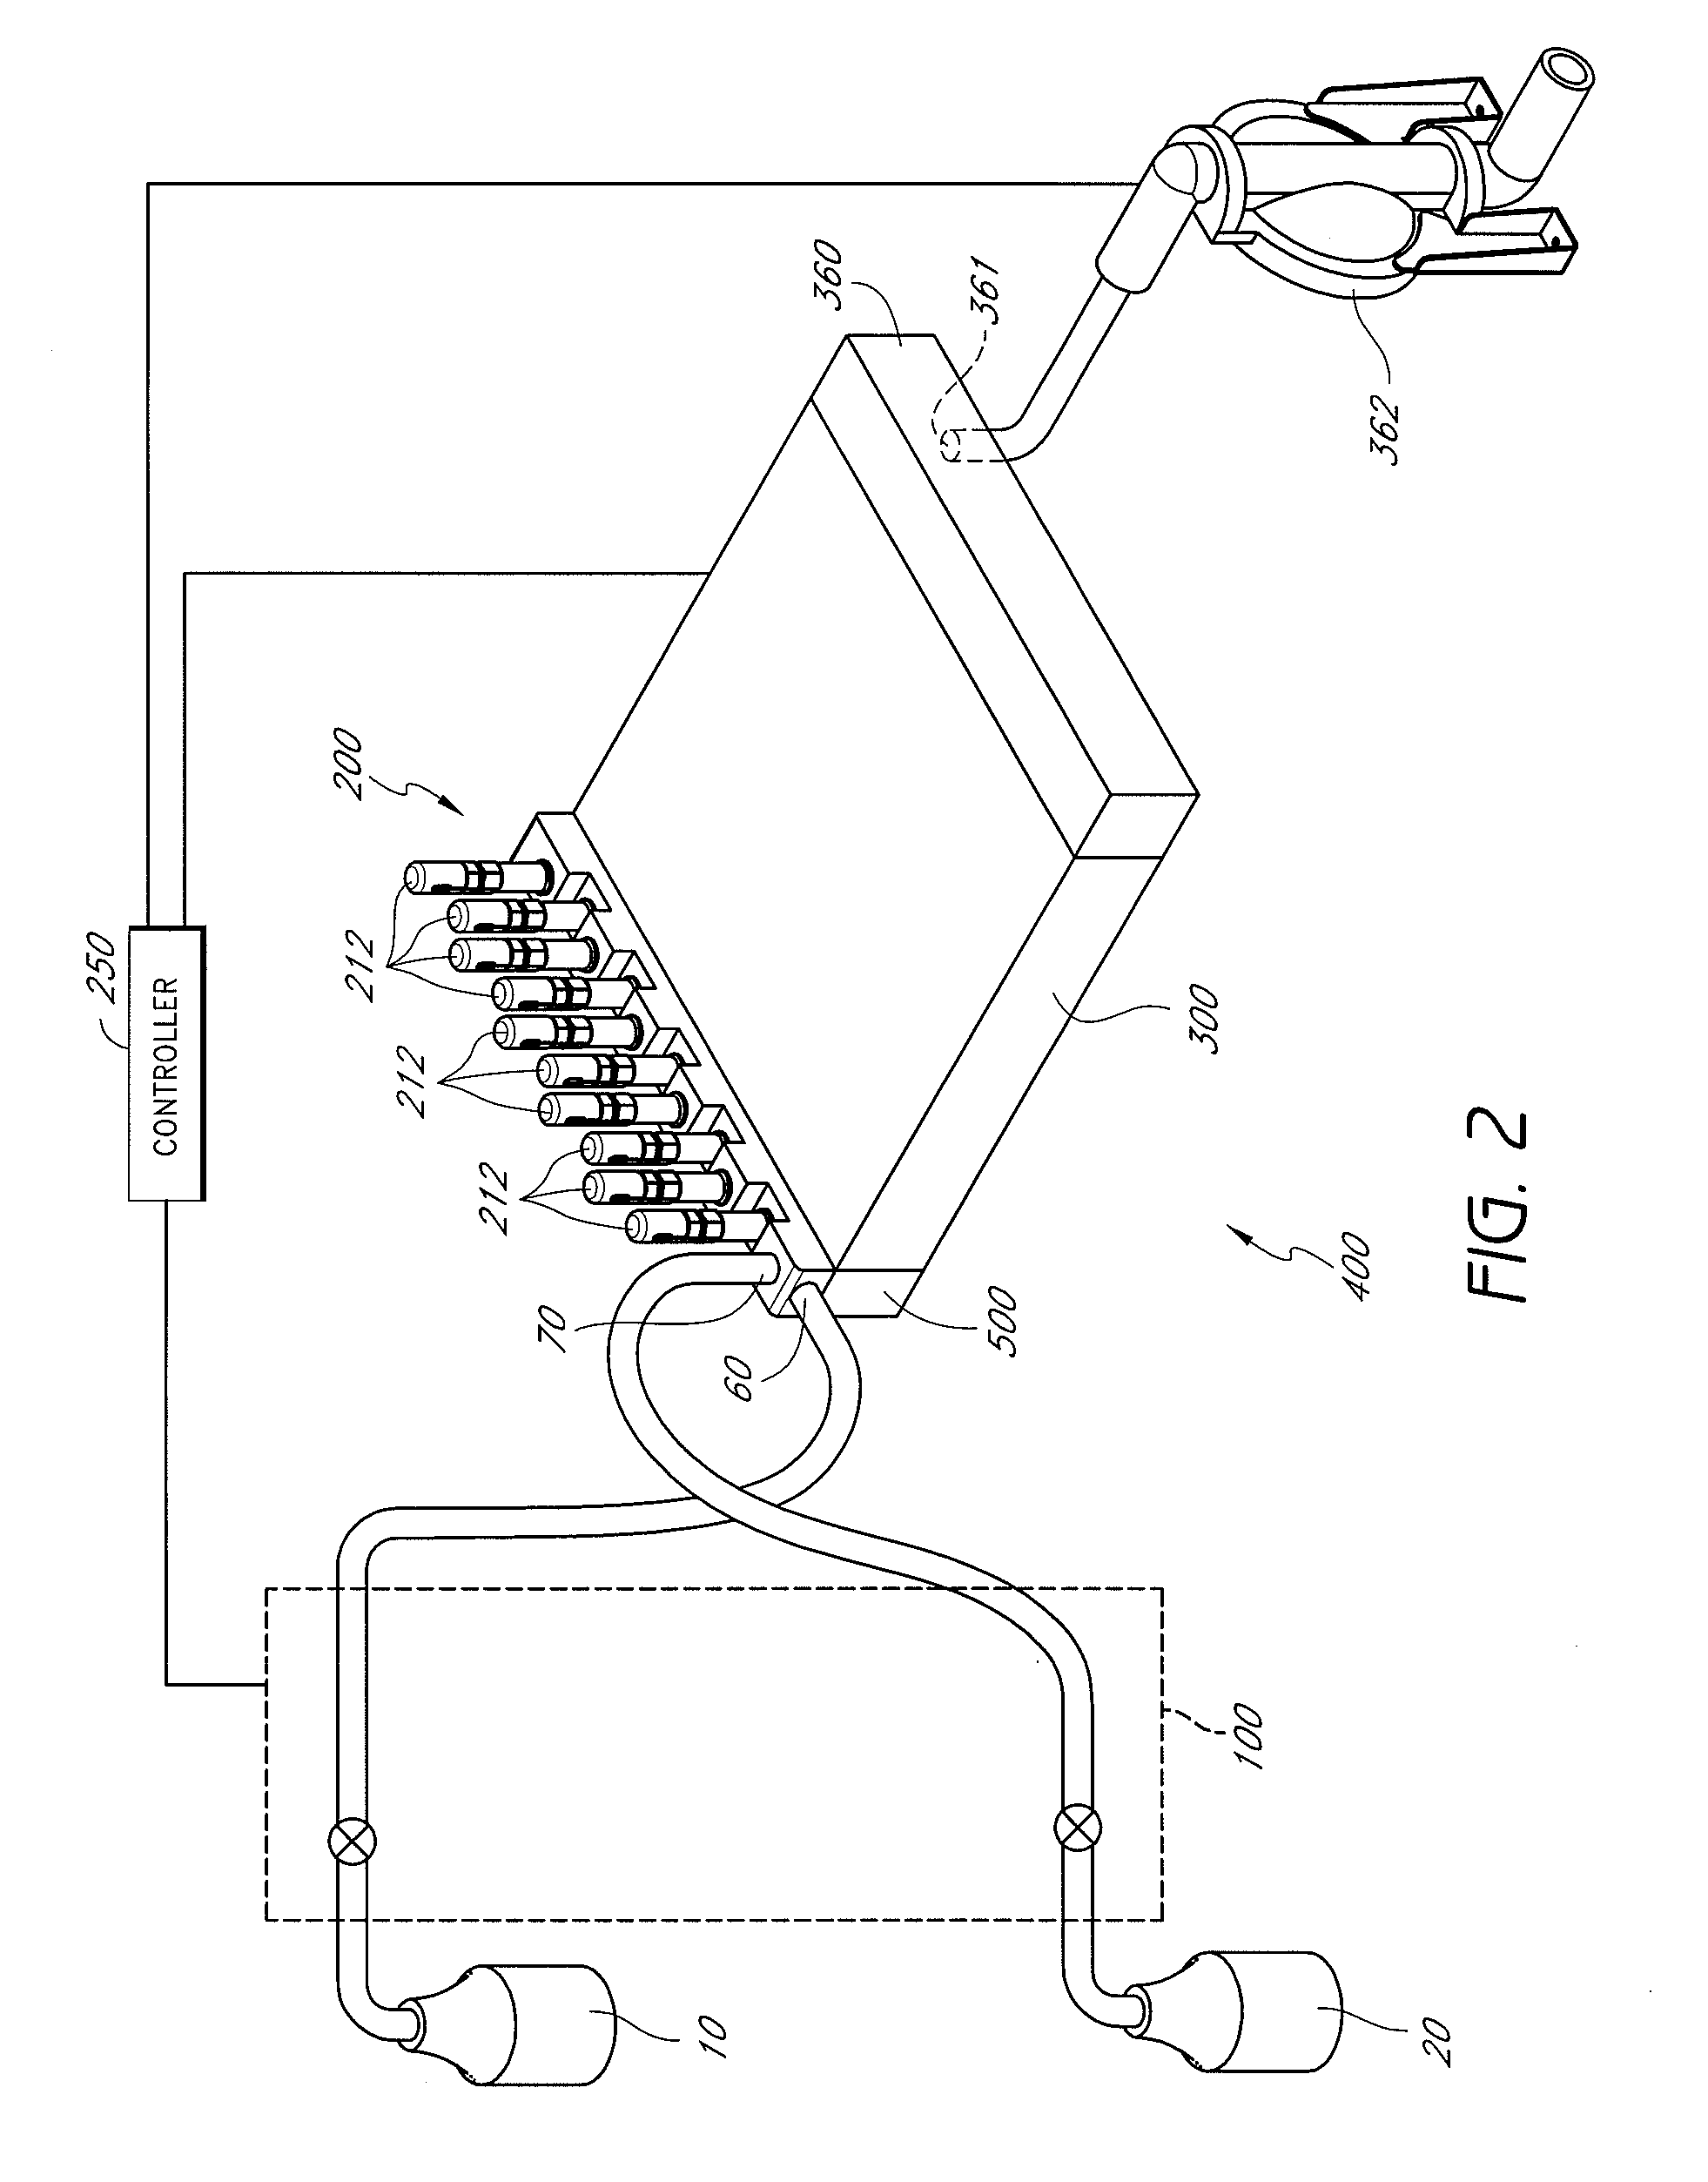 Substrate reactor with adjustable injectors for mixing gases within reaction chamber